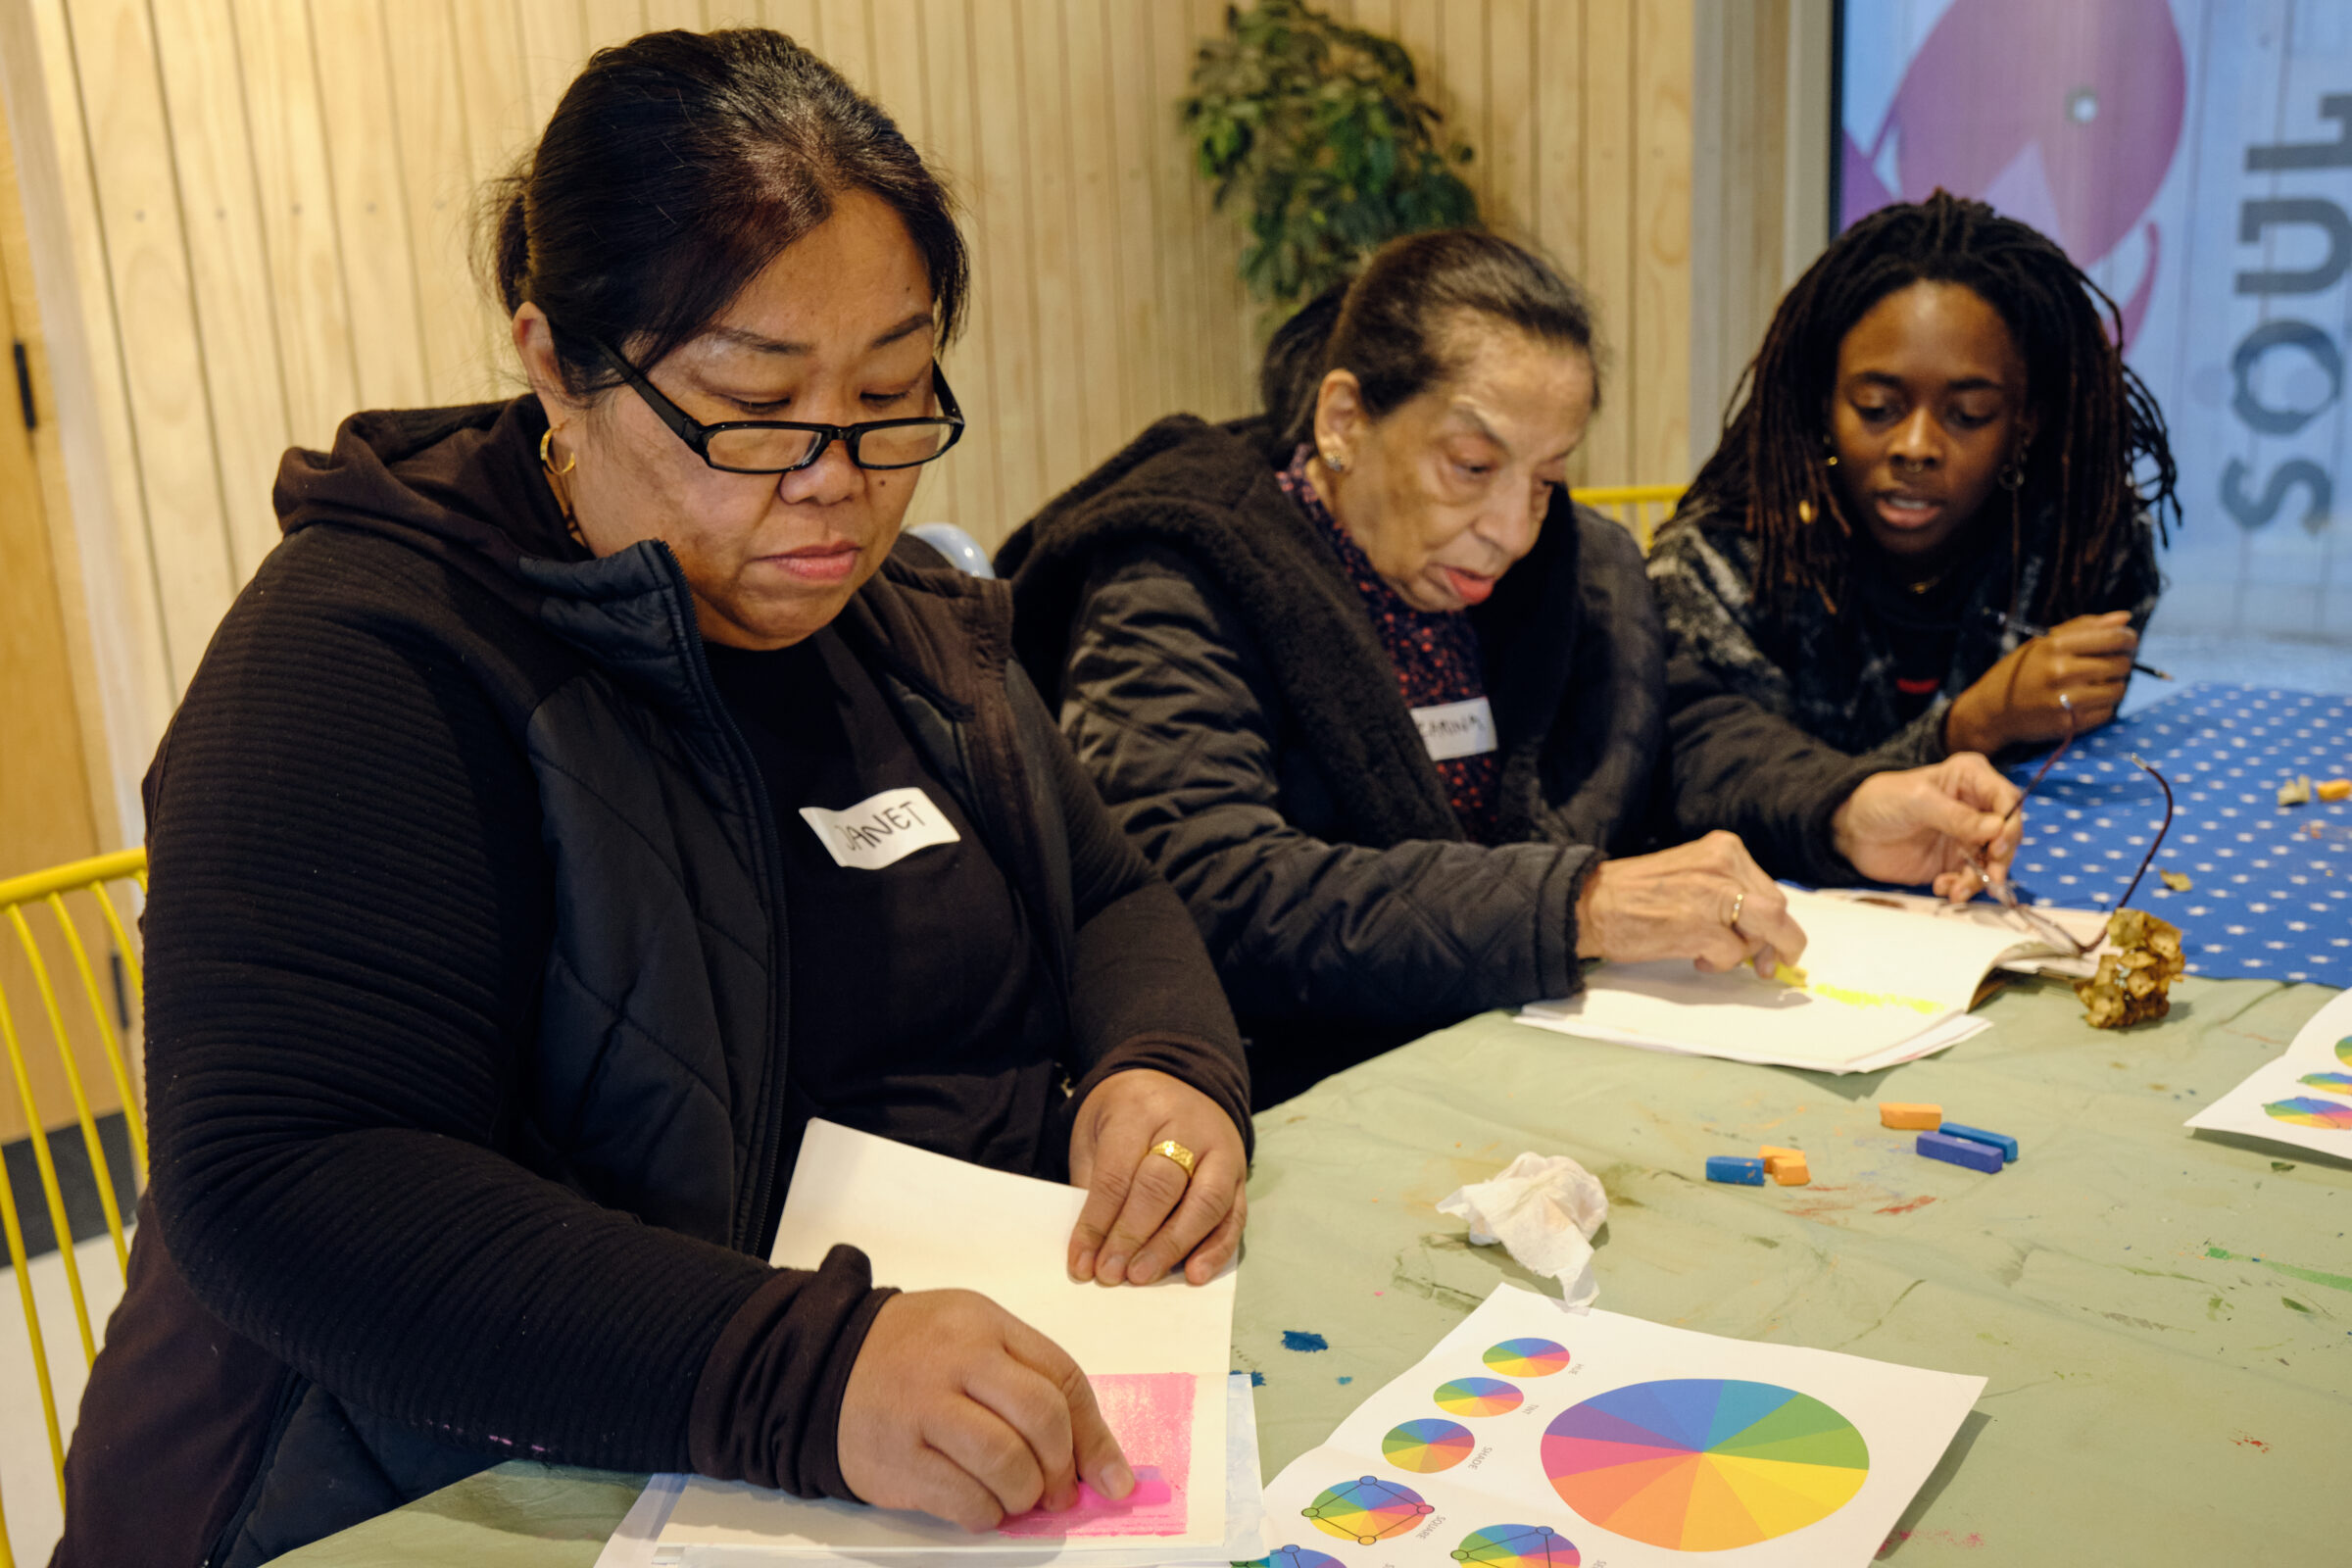 Three women are sitting at a table, using colourful pastels to create shapes.